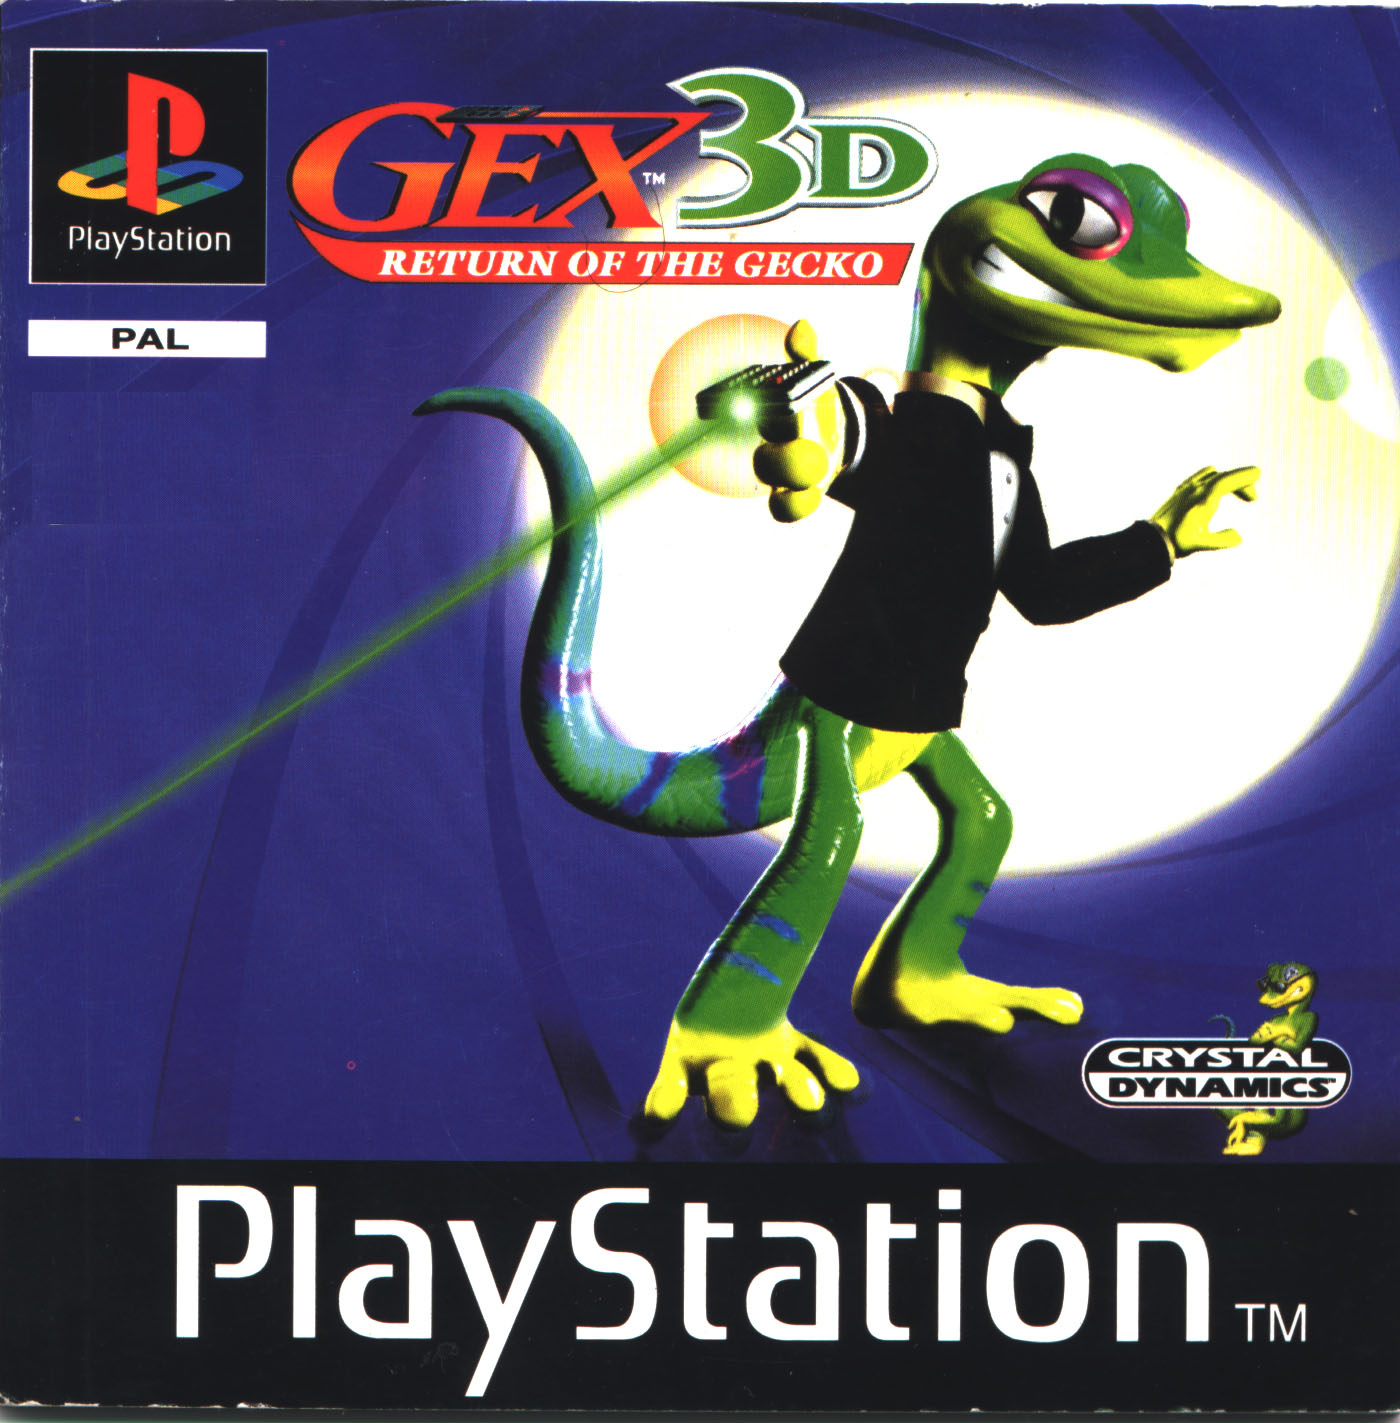 Gex 3D : Return of the Gecko